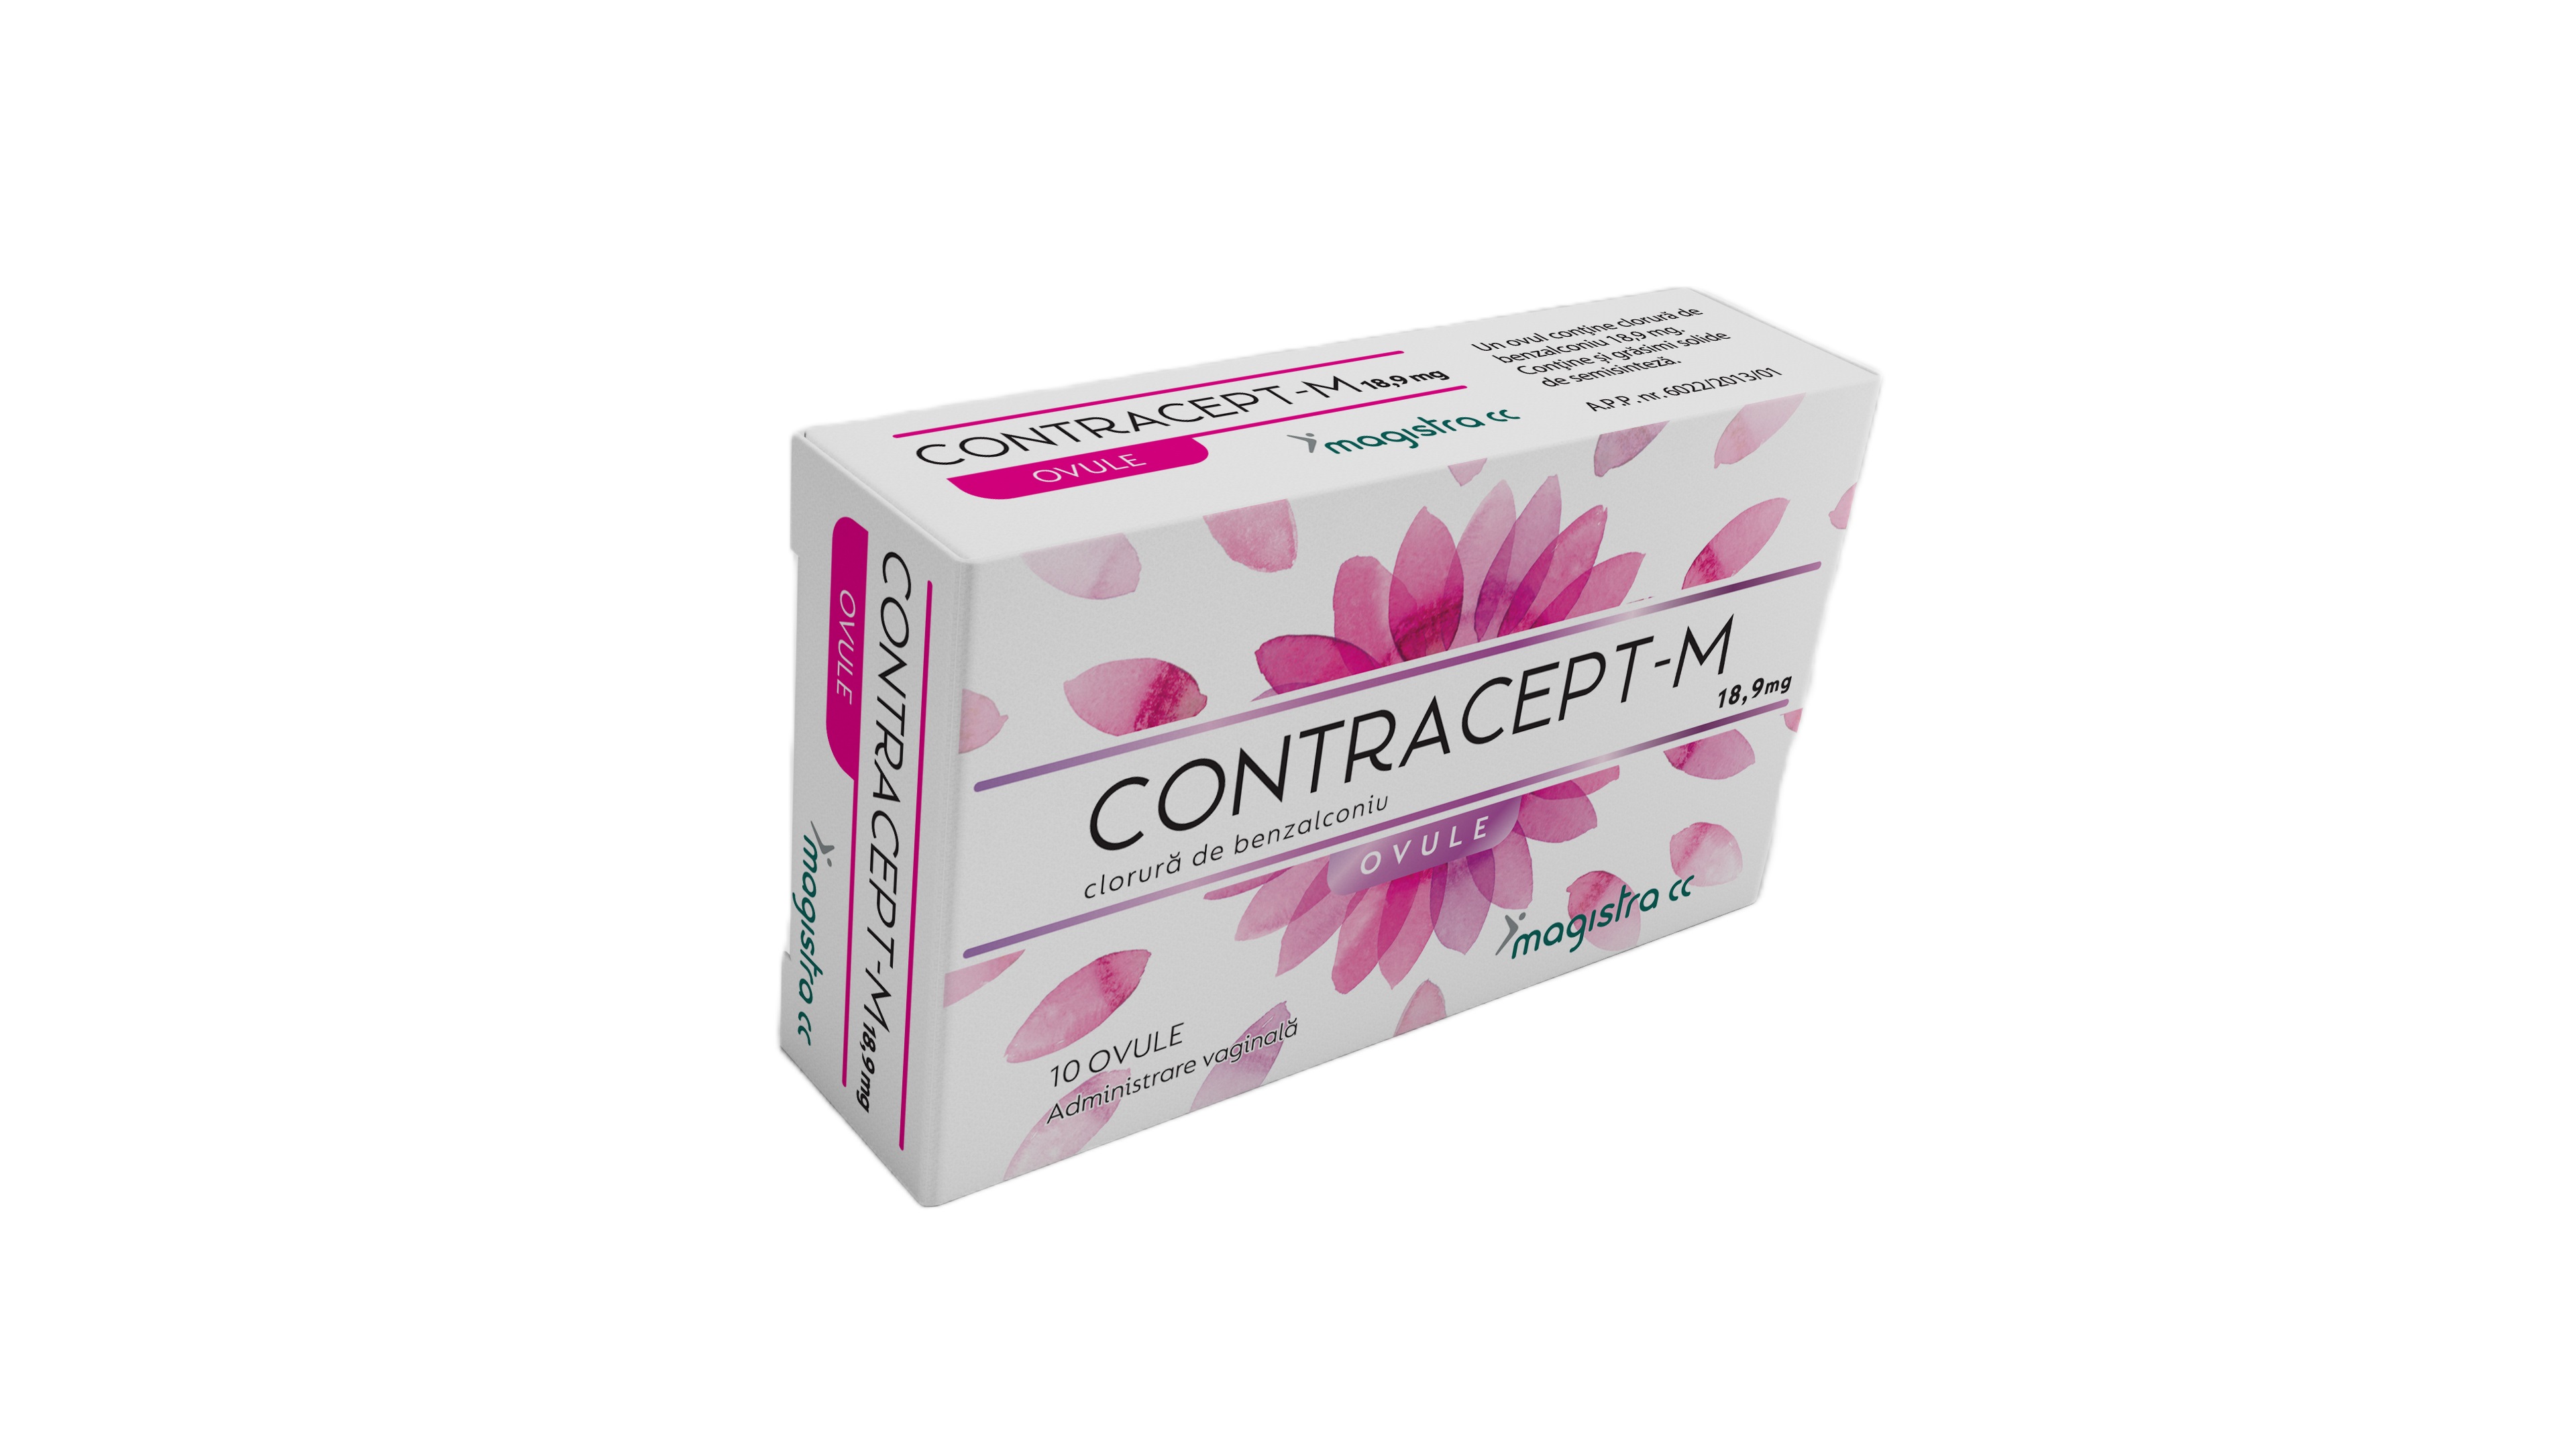 Afectiuni ginecologice - Contracept-M, 10 ovule, Magistra, nordpharm.ro